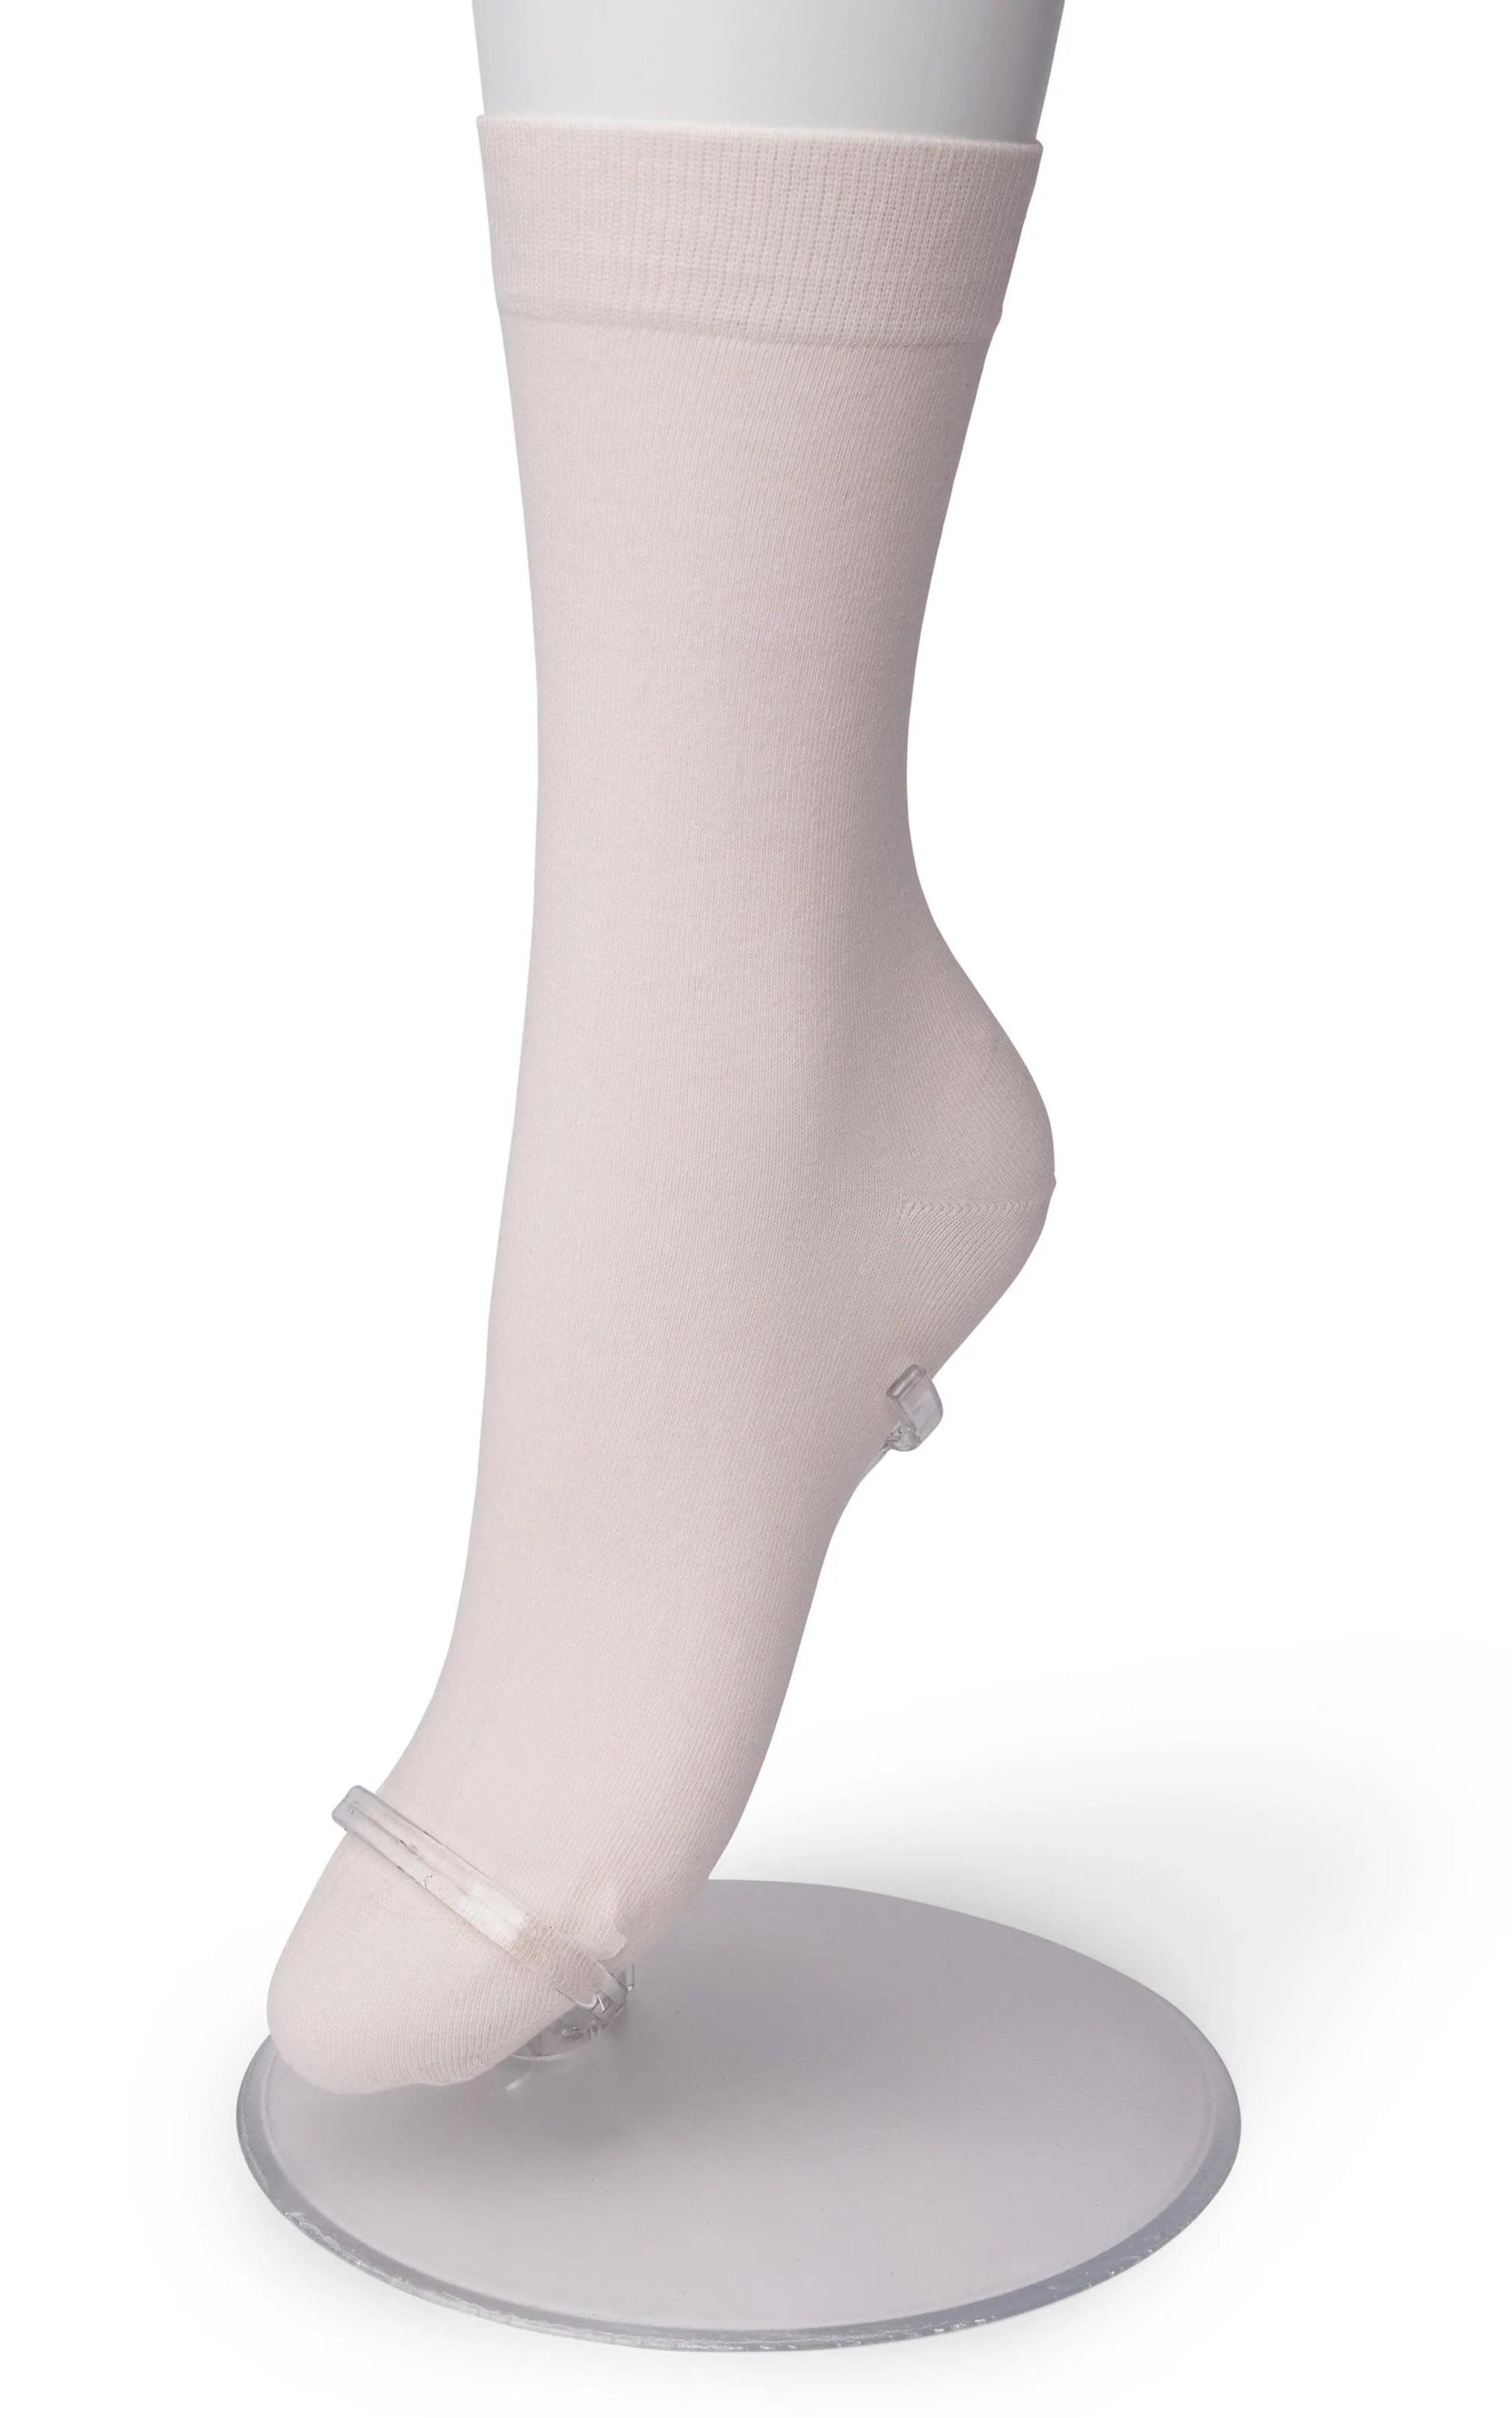 Bonnie Doon 83422 Cotton Sock - pale light baby pink (powder blush) ankle socks available in women sizes